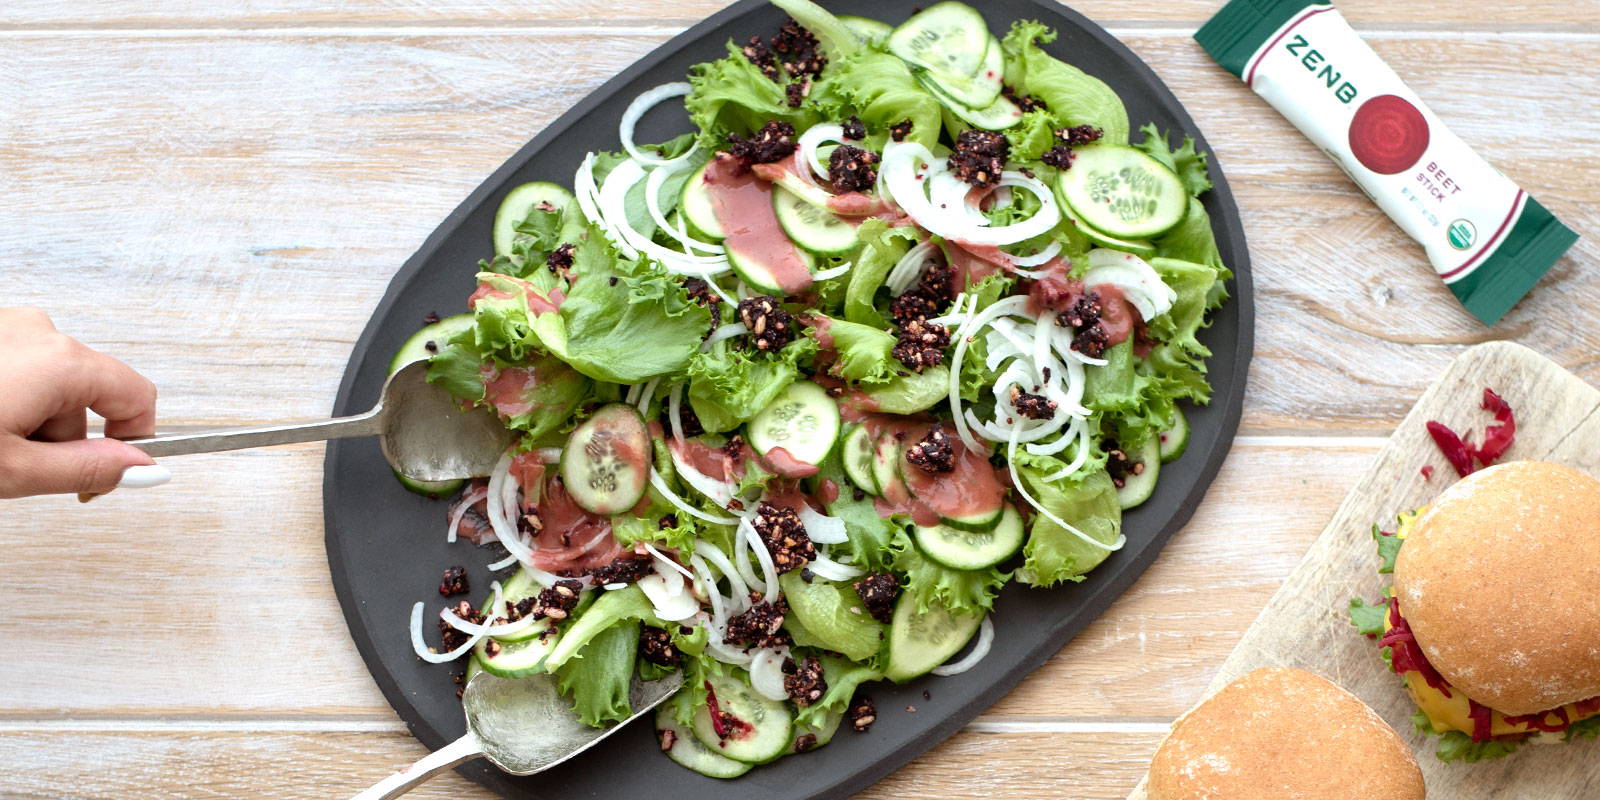 Simple salad recipe that’s easy to make and tastes delicious with only a few ingredients like Cleveland Beet Salad Dressing